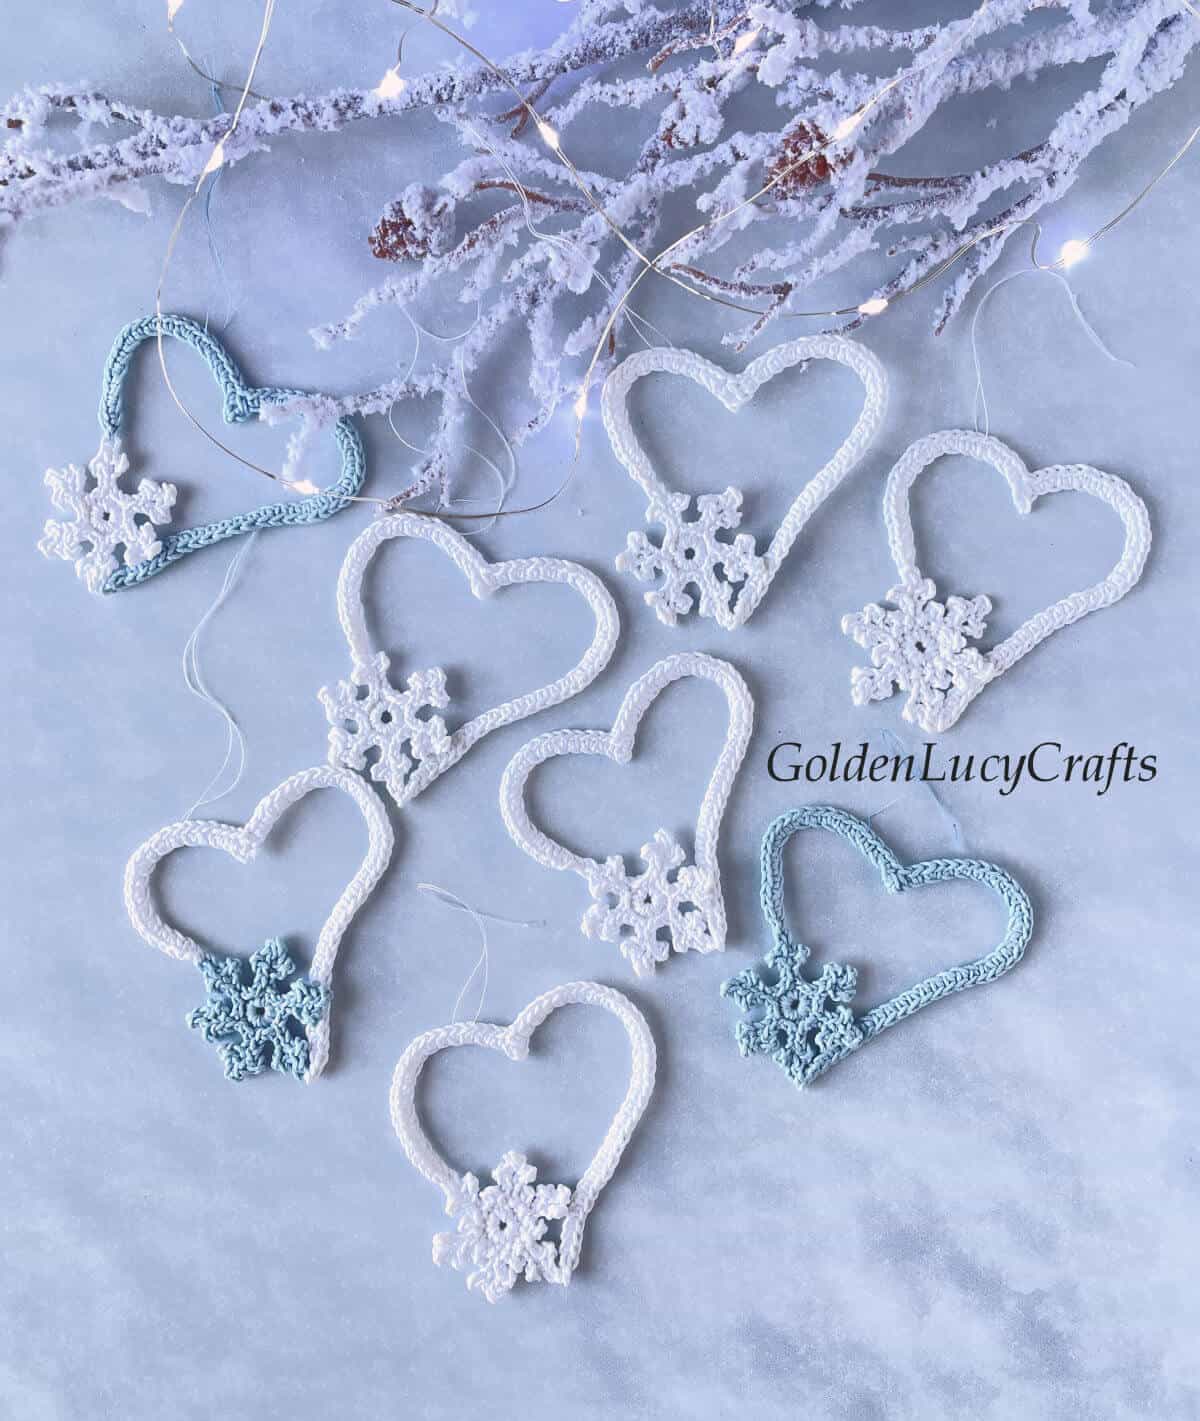 Bunch of crocheted snowflake hearts Christmas ornaments.